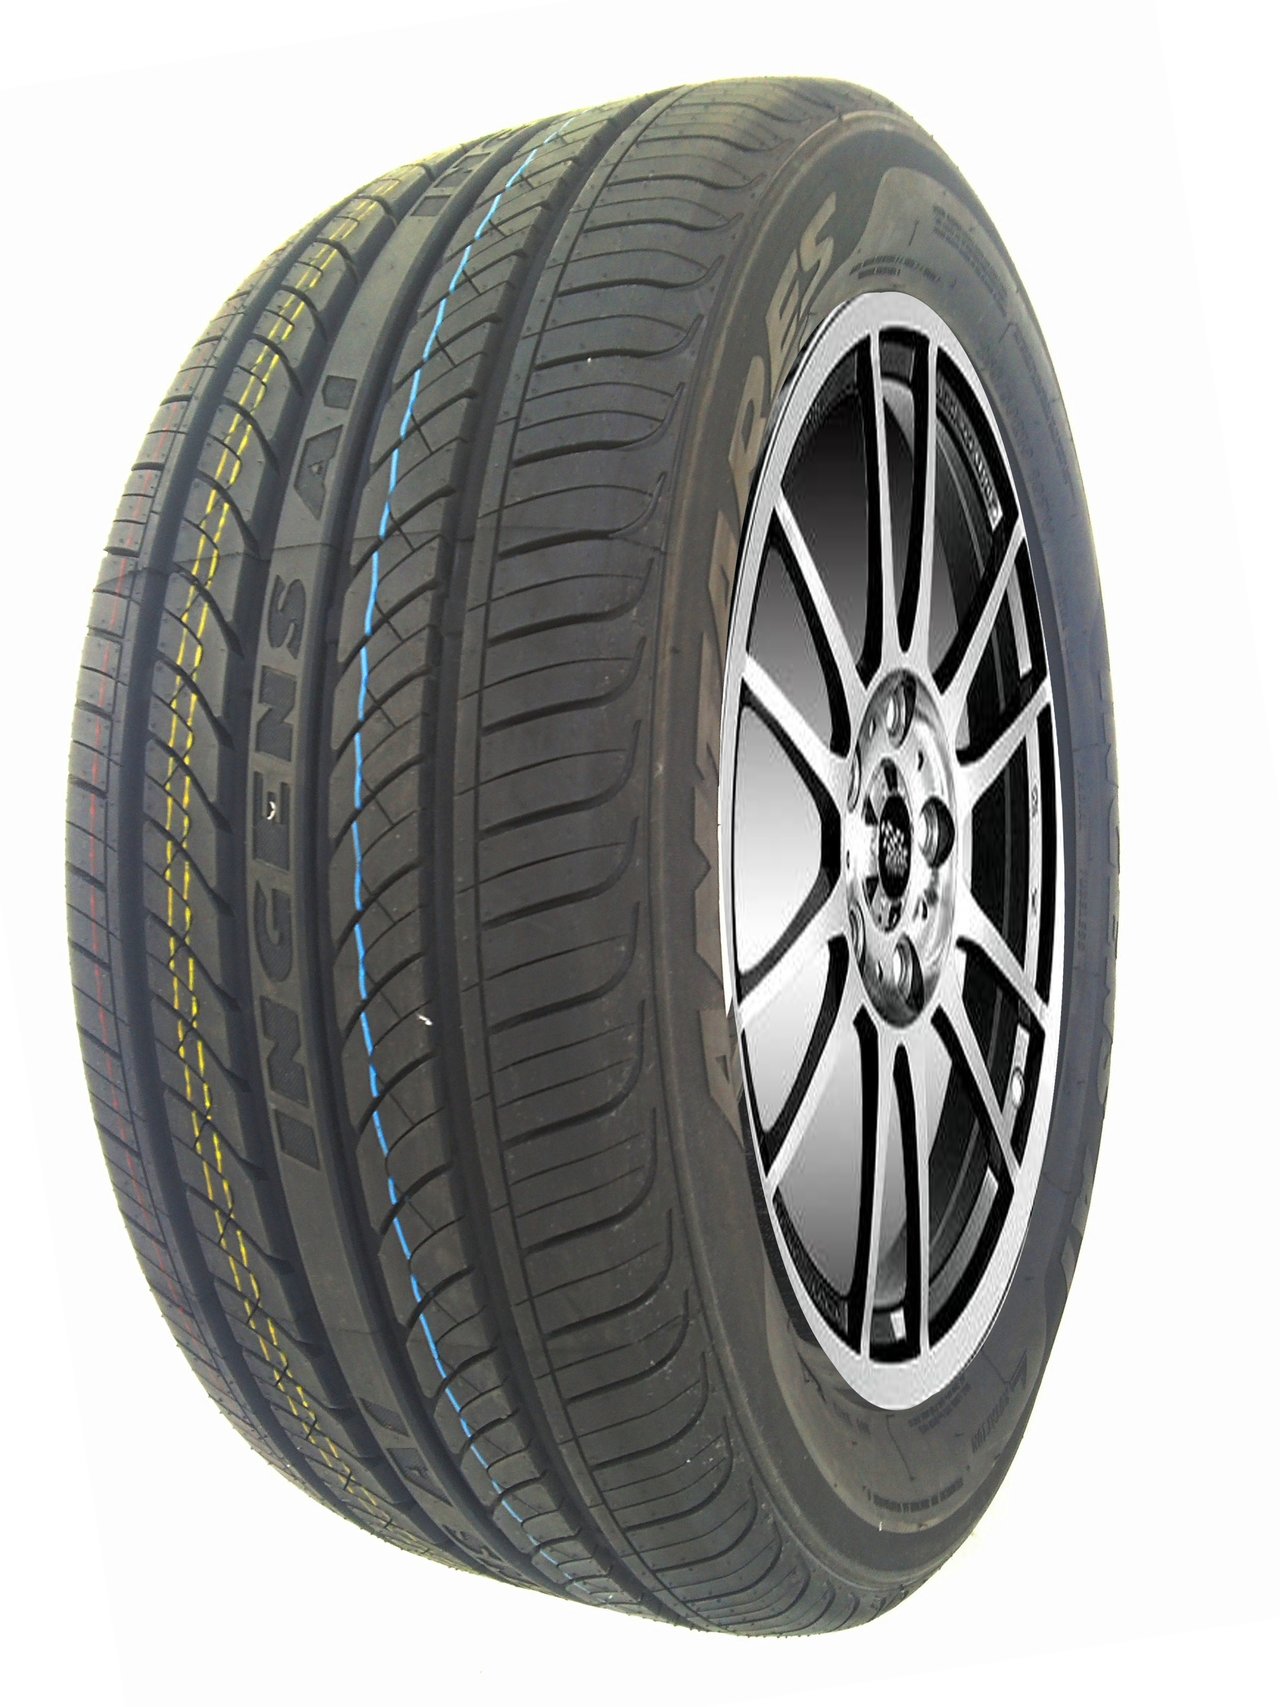 Antares Ingens A1 175/70R14 84T TL M+S